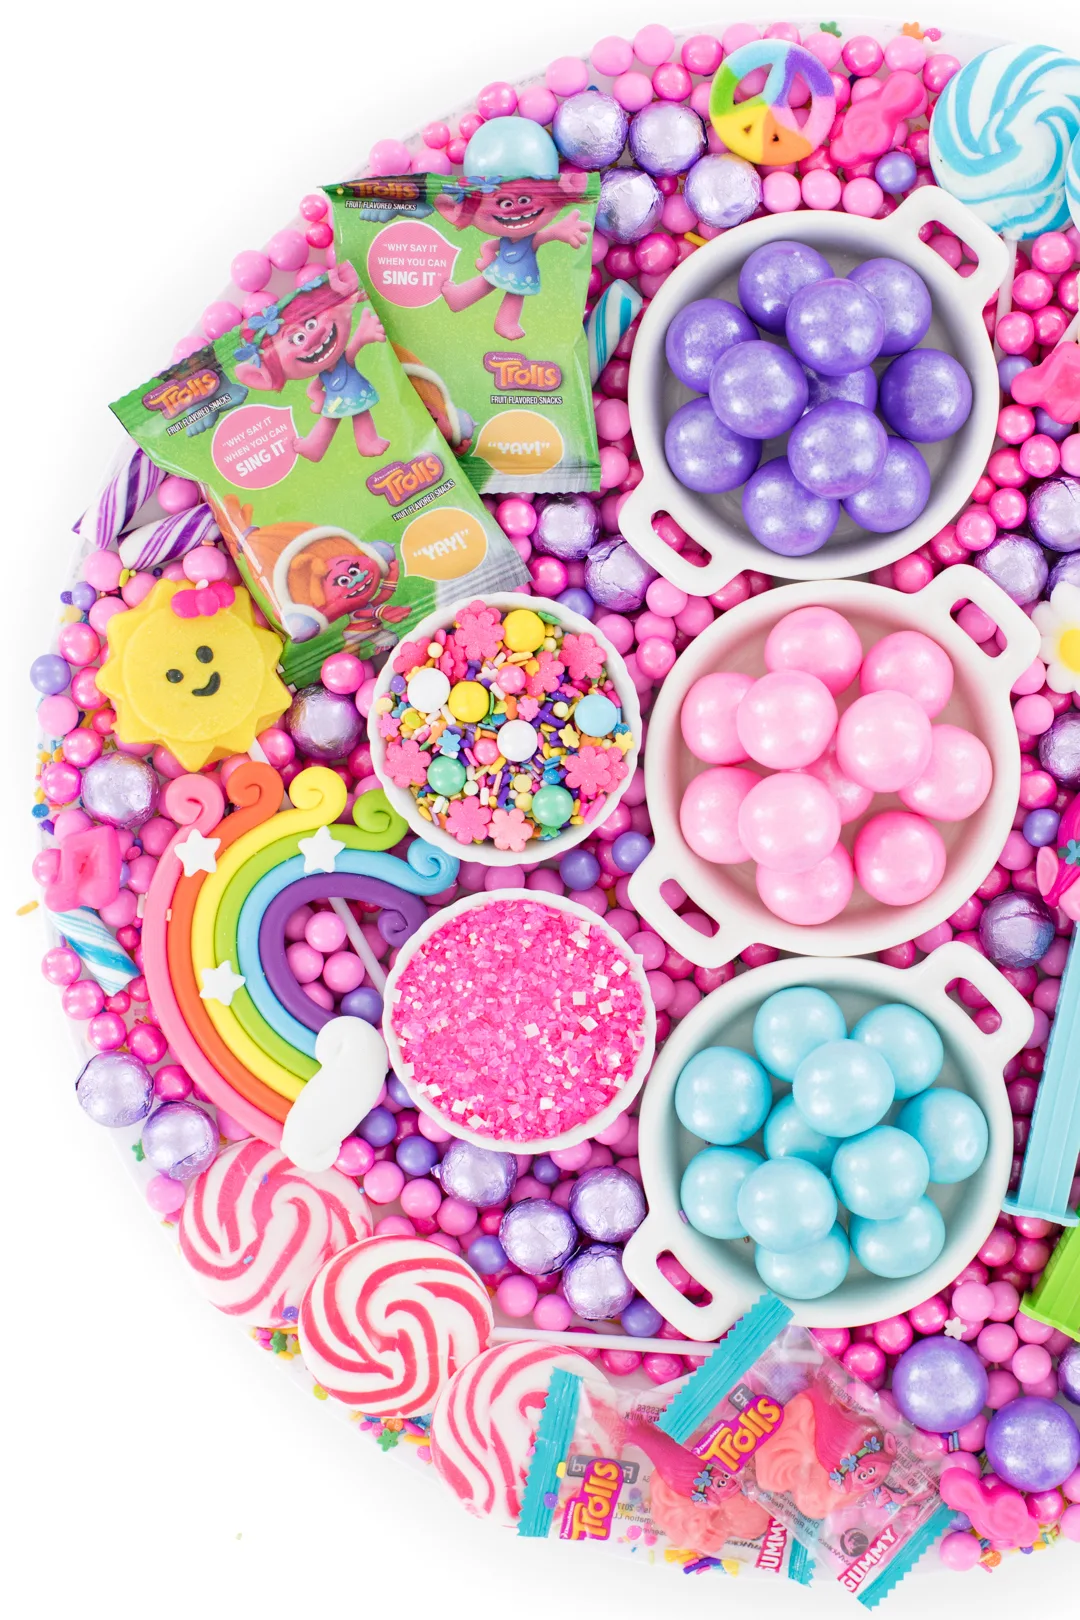 trolls party candy ideas. colorful tray of candies that match trolls characters 